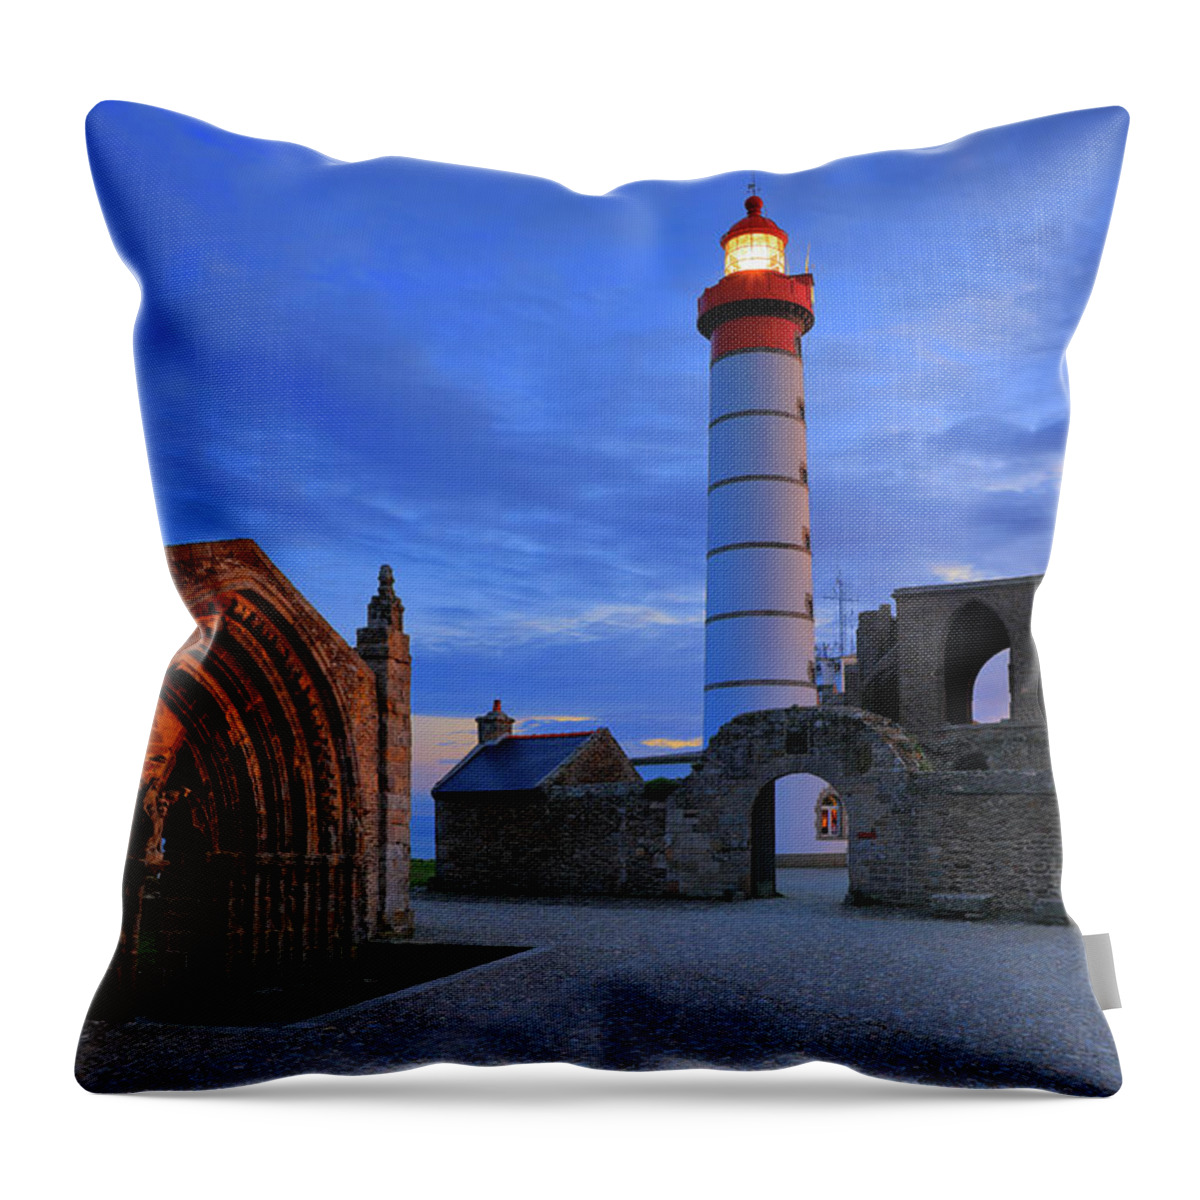 Estock Throw Pillow featuring the digital art France, Brittany, Atlantic Ocean, Finistere, Coast, Brest, View Of The Pointe De Saint Mathieu Lighthouse And The Abbey Ruins, Located Near Le Conquet Village On The Brest Harbor #1 by Riccardo Spila